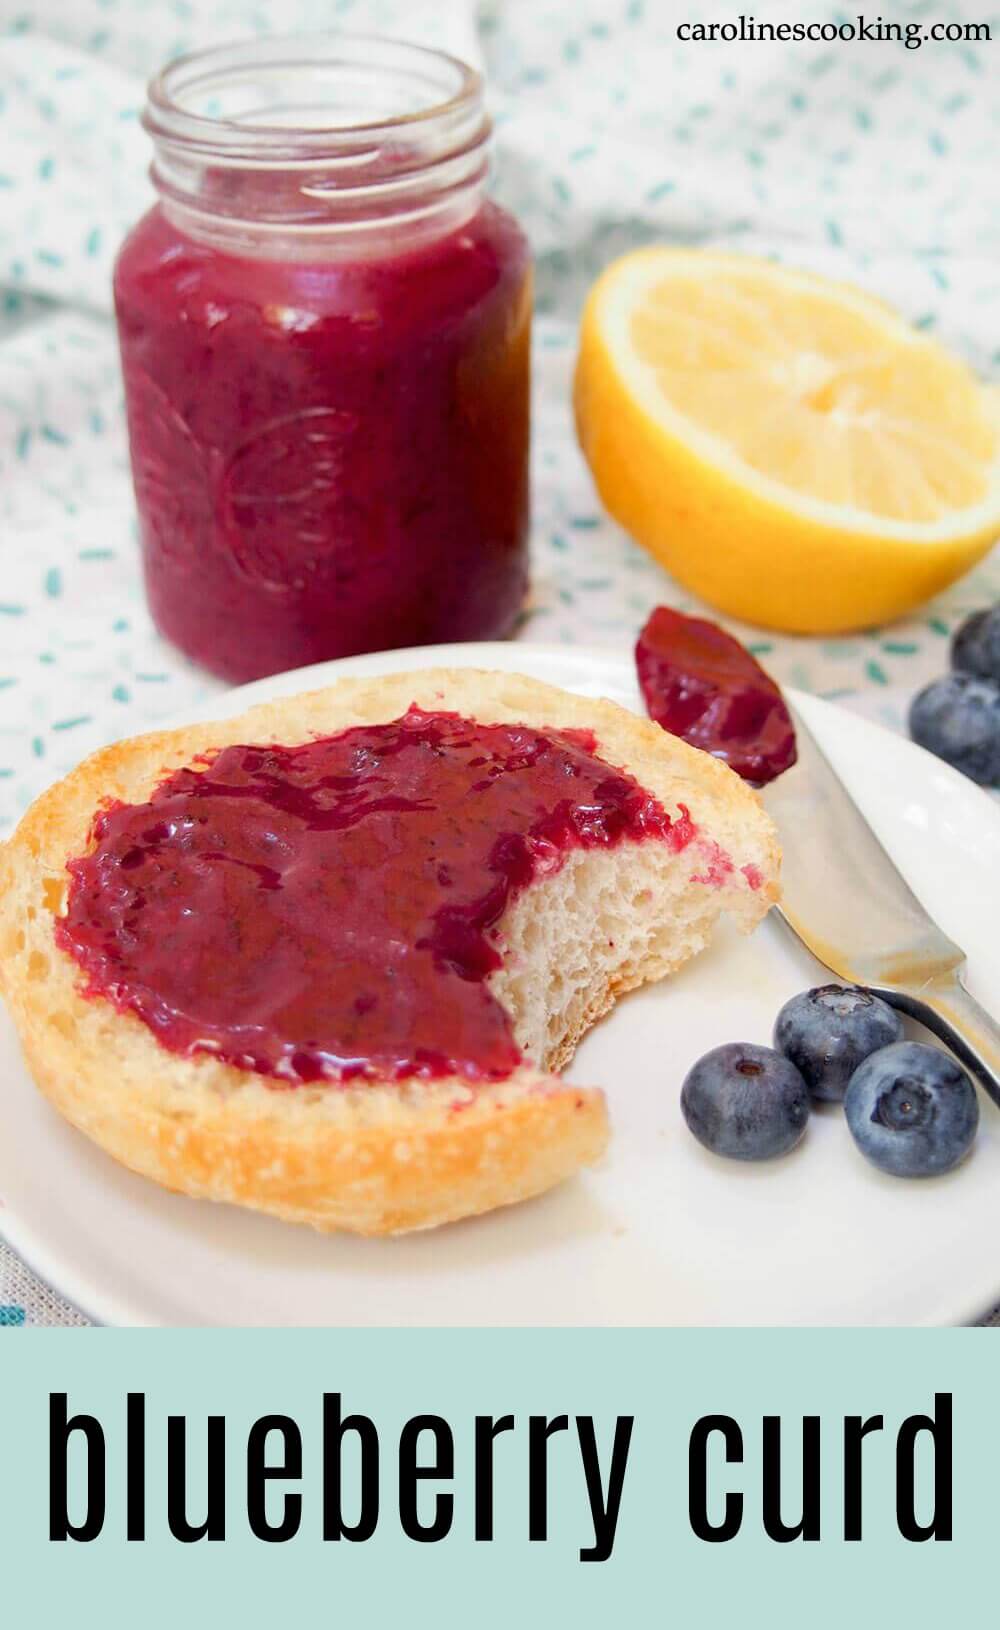 Blueberry curd is a beautifully bright variation on lemon curd that's a wonderful way to brighten up your toast.  It's easy to make, and with a gentle blueberry and citrus flavor, it's a great change from jam.  #blueberry #curd #spread #lemon